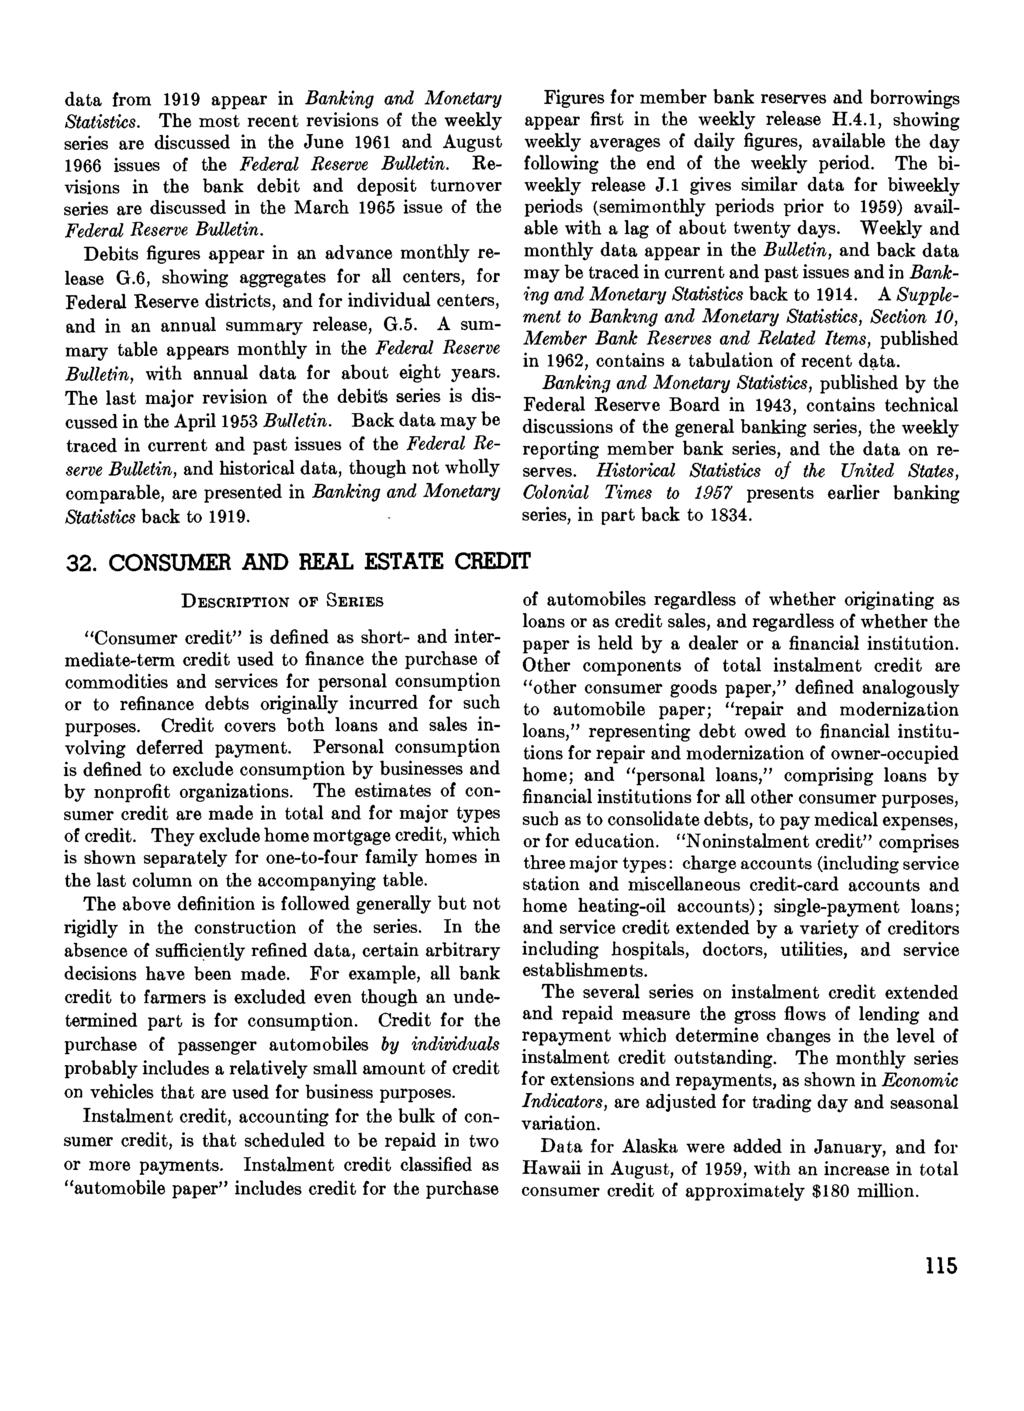 data from 1919 appear in Banking and Monetary Statistics. The most recent revisions of the weekly series are discussed in the June 1961 and August 1966 issues of the Federal Reserve Bulletin.